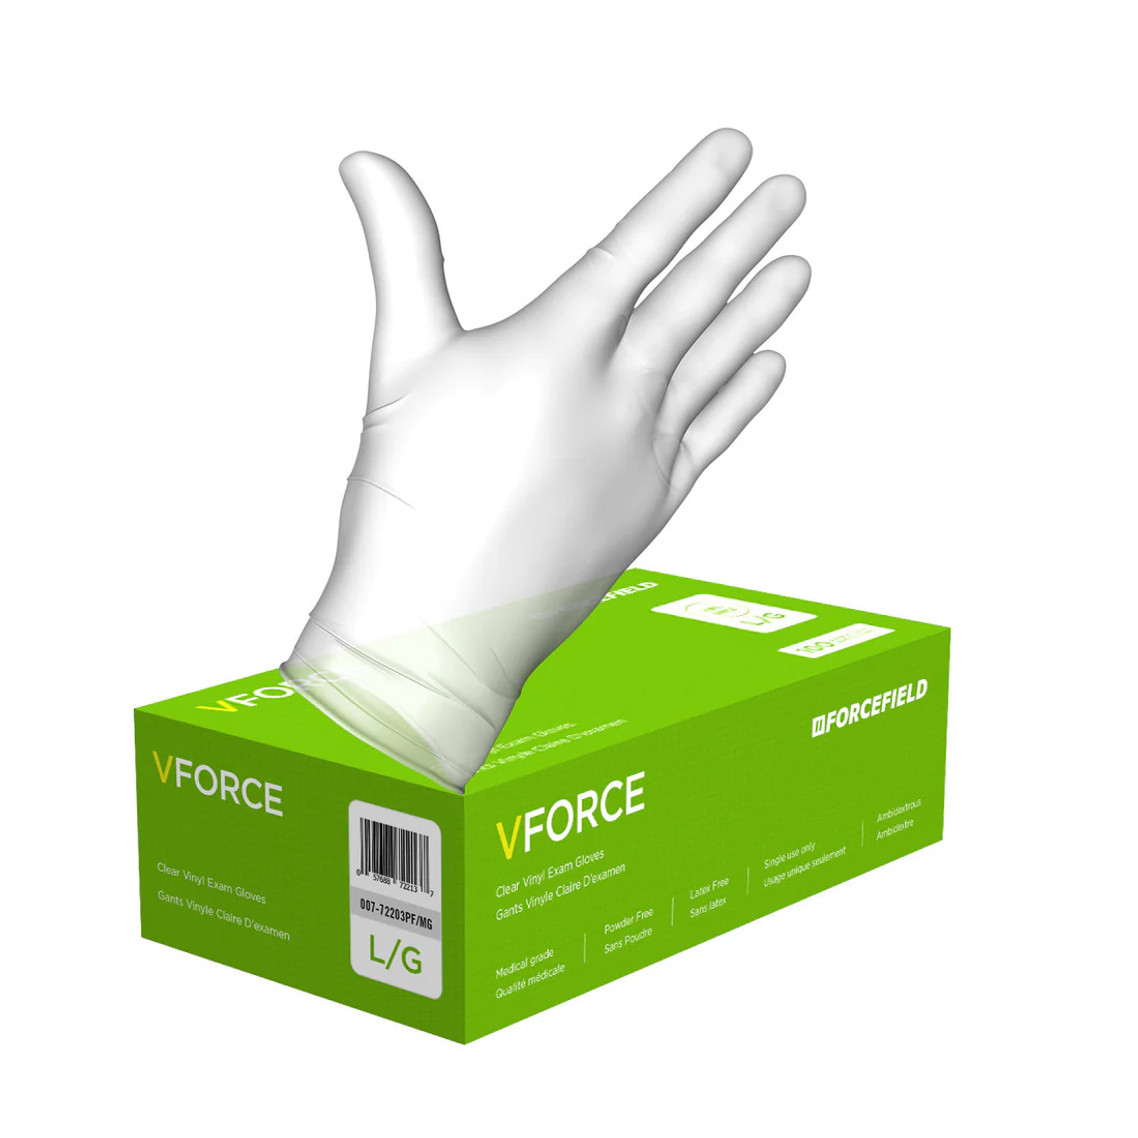 ForceField VForce Vinyl Disposable Examination Gloves (Case of 1000 Gloves) | SafetyApparel.ca